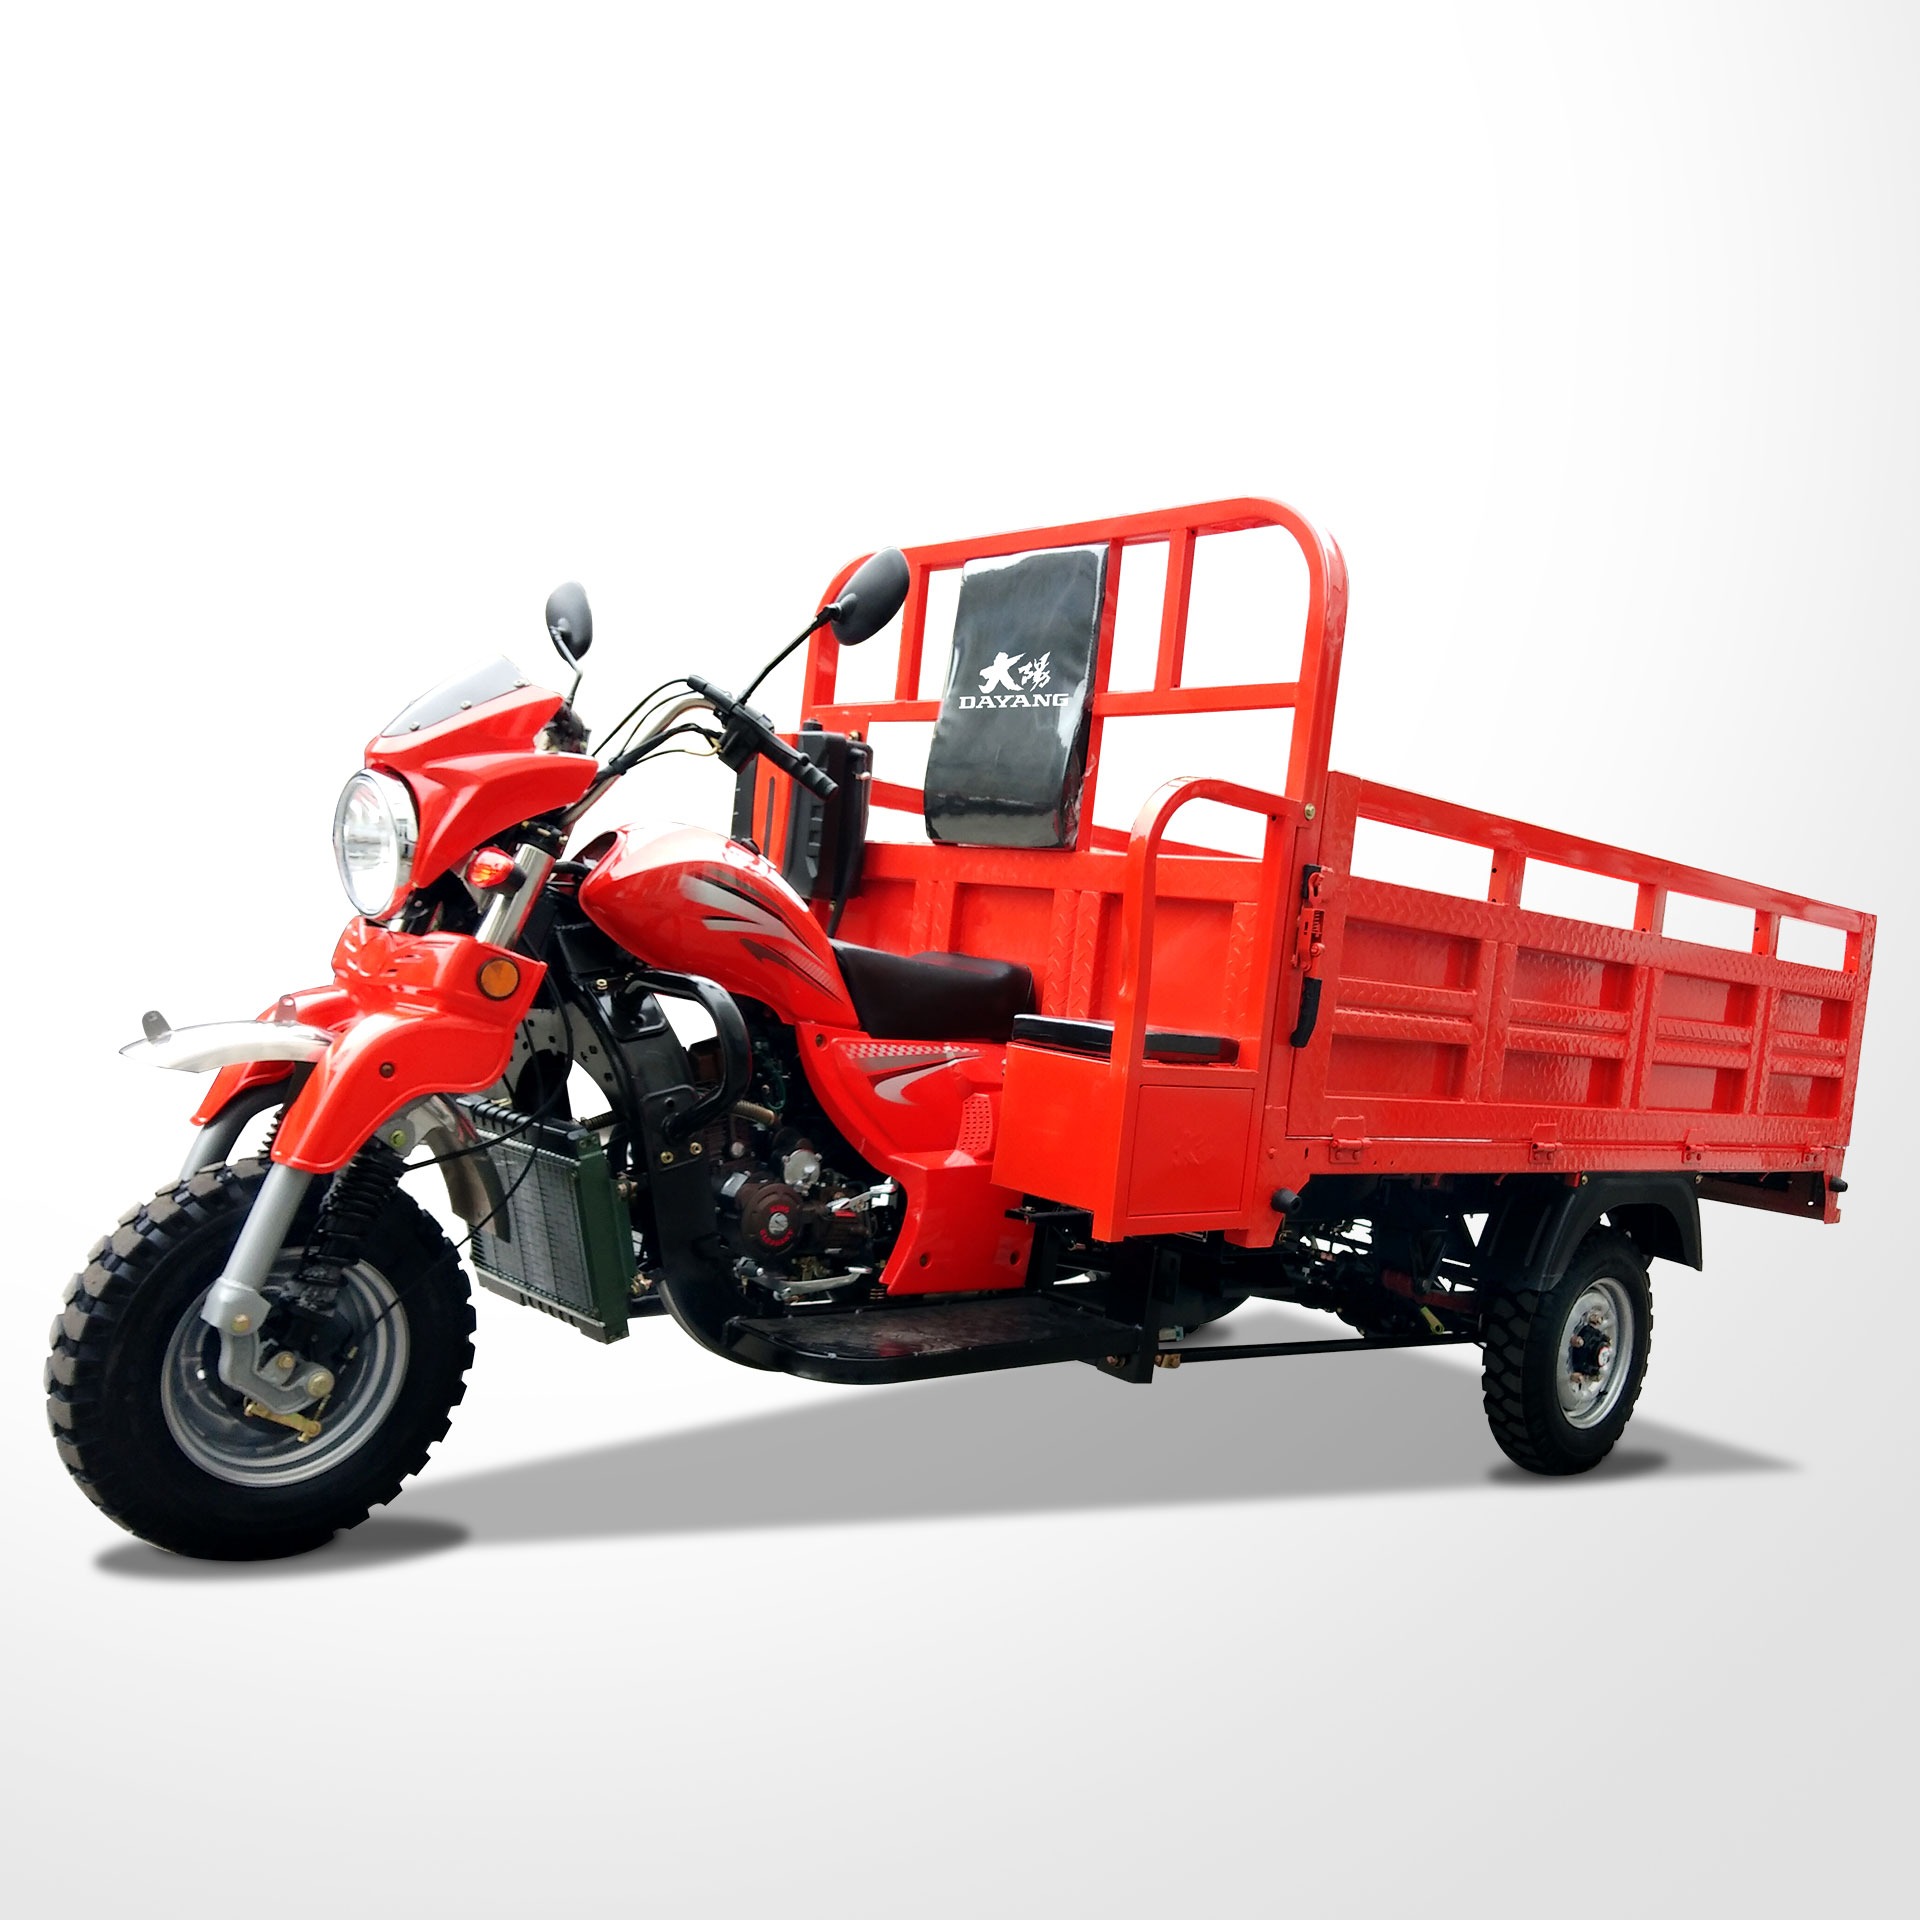 DAYANG lifan  high-power engine fuel oil tanzania motor tricycle for sale open cargo motor tricycle